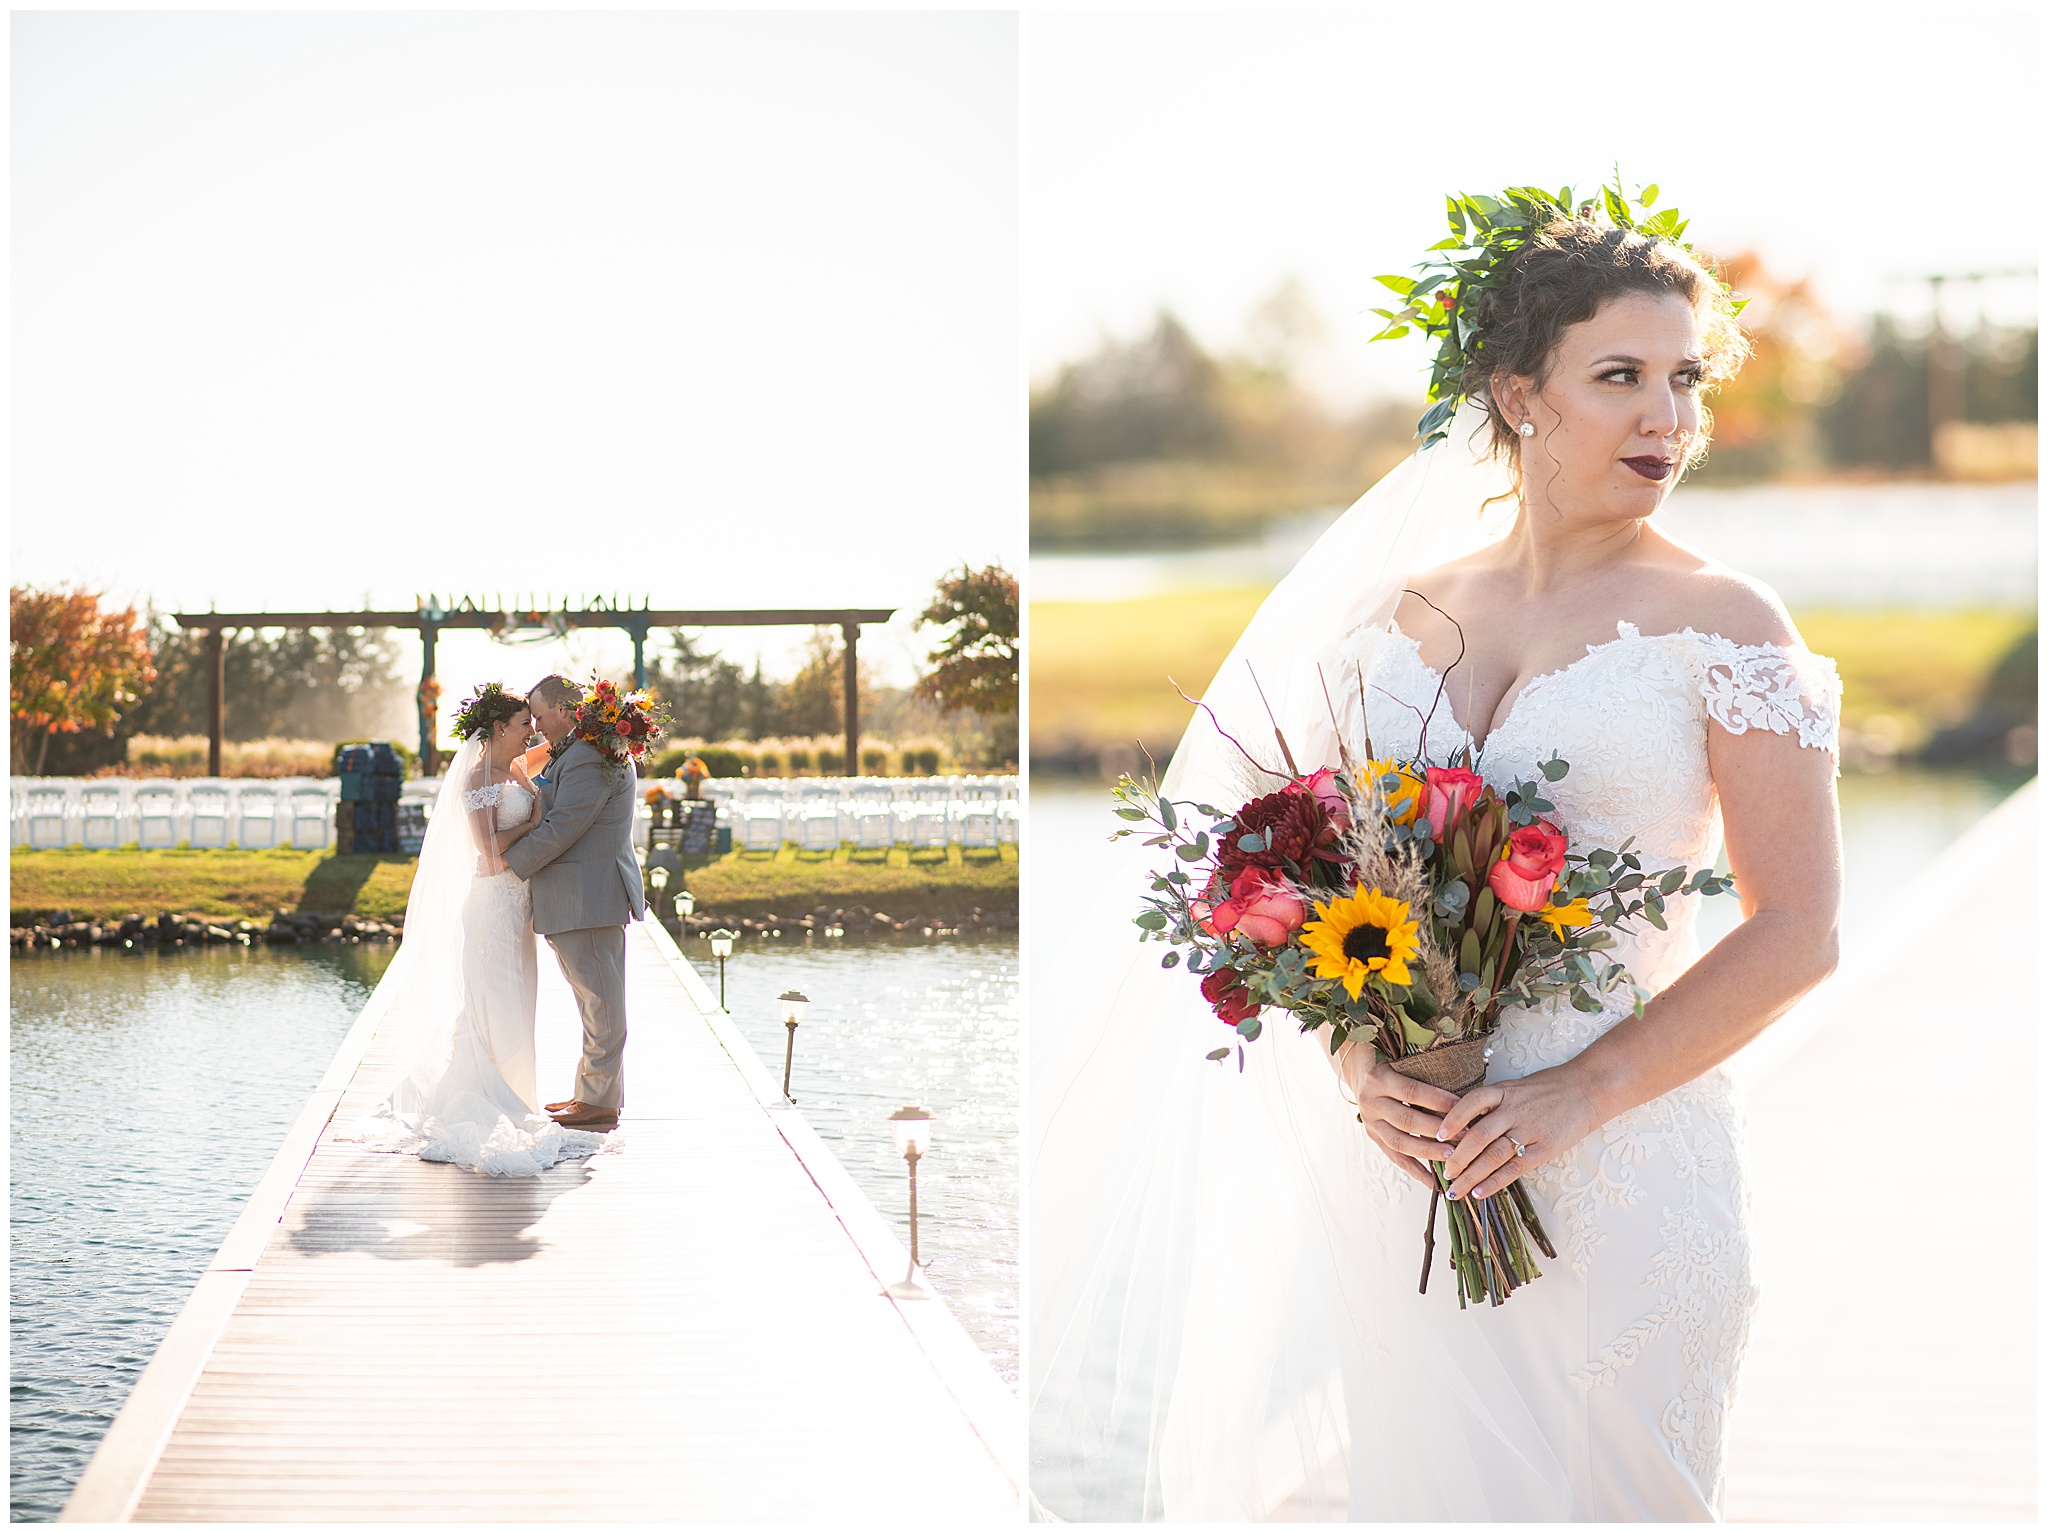 A bride in a white lace dress and floral headpiece stands holding her colorful bouquet on a dock with her husband Wedding Venues in Virginia